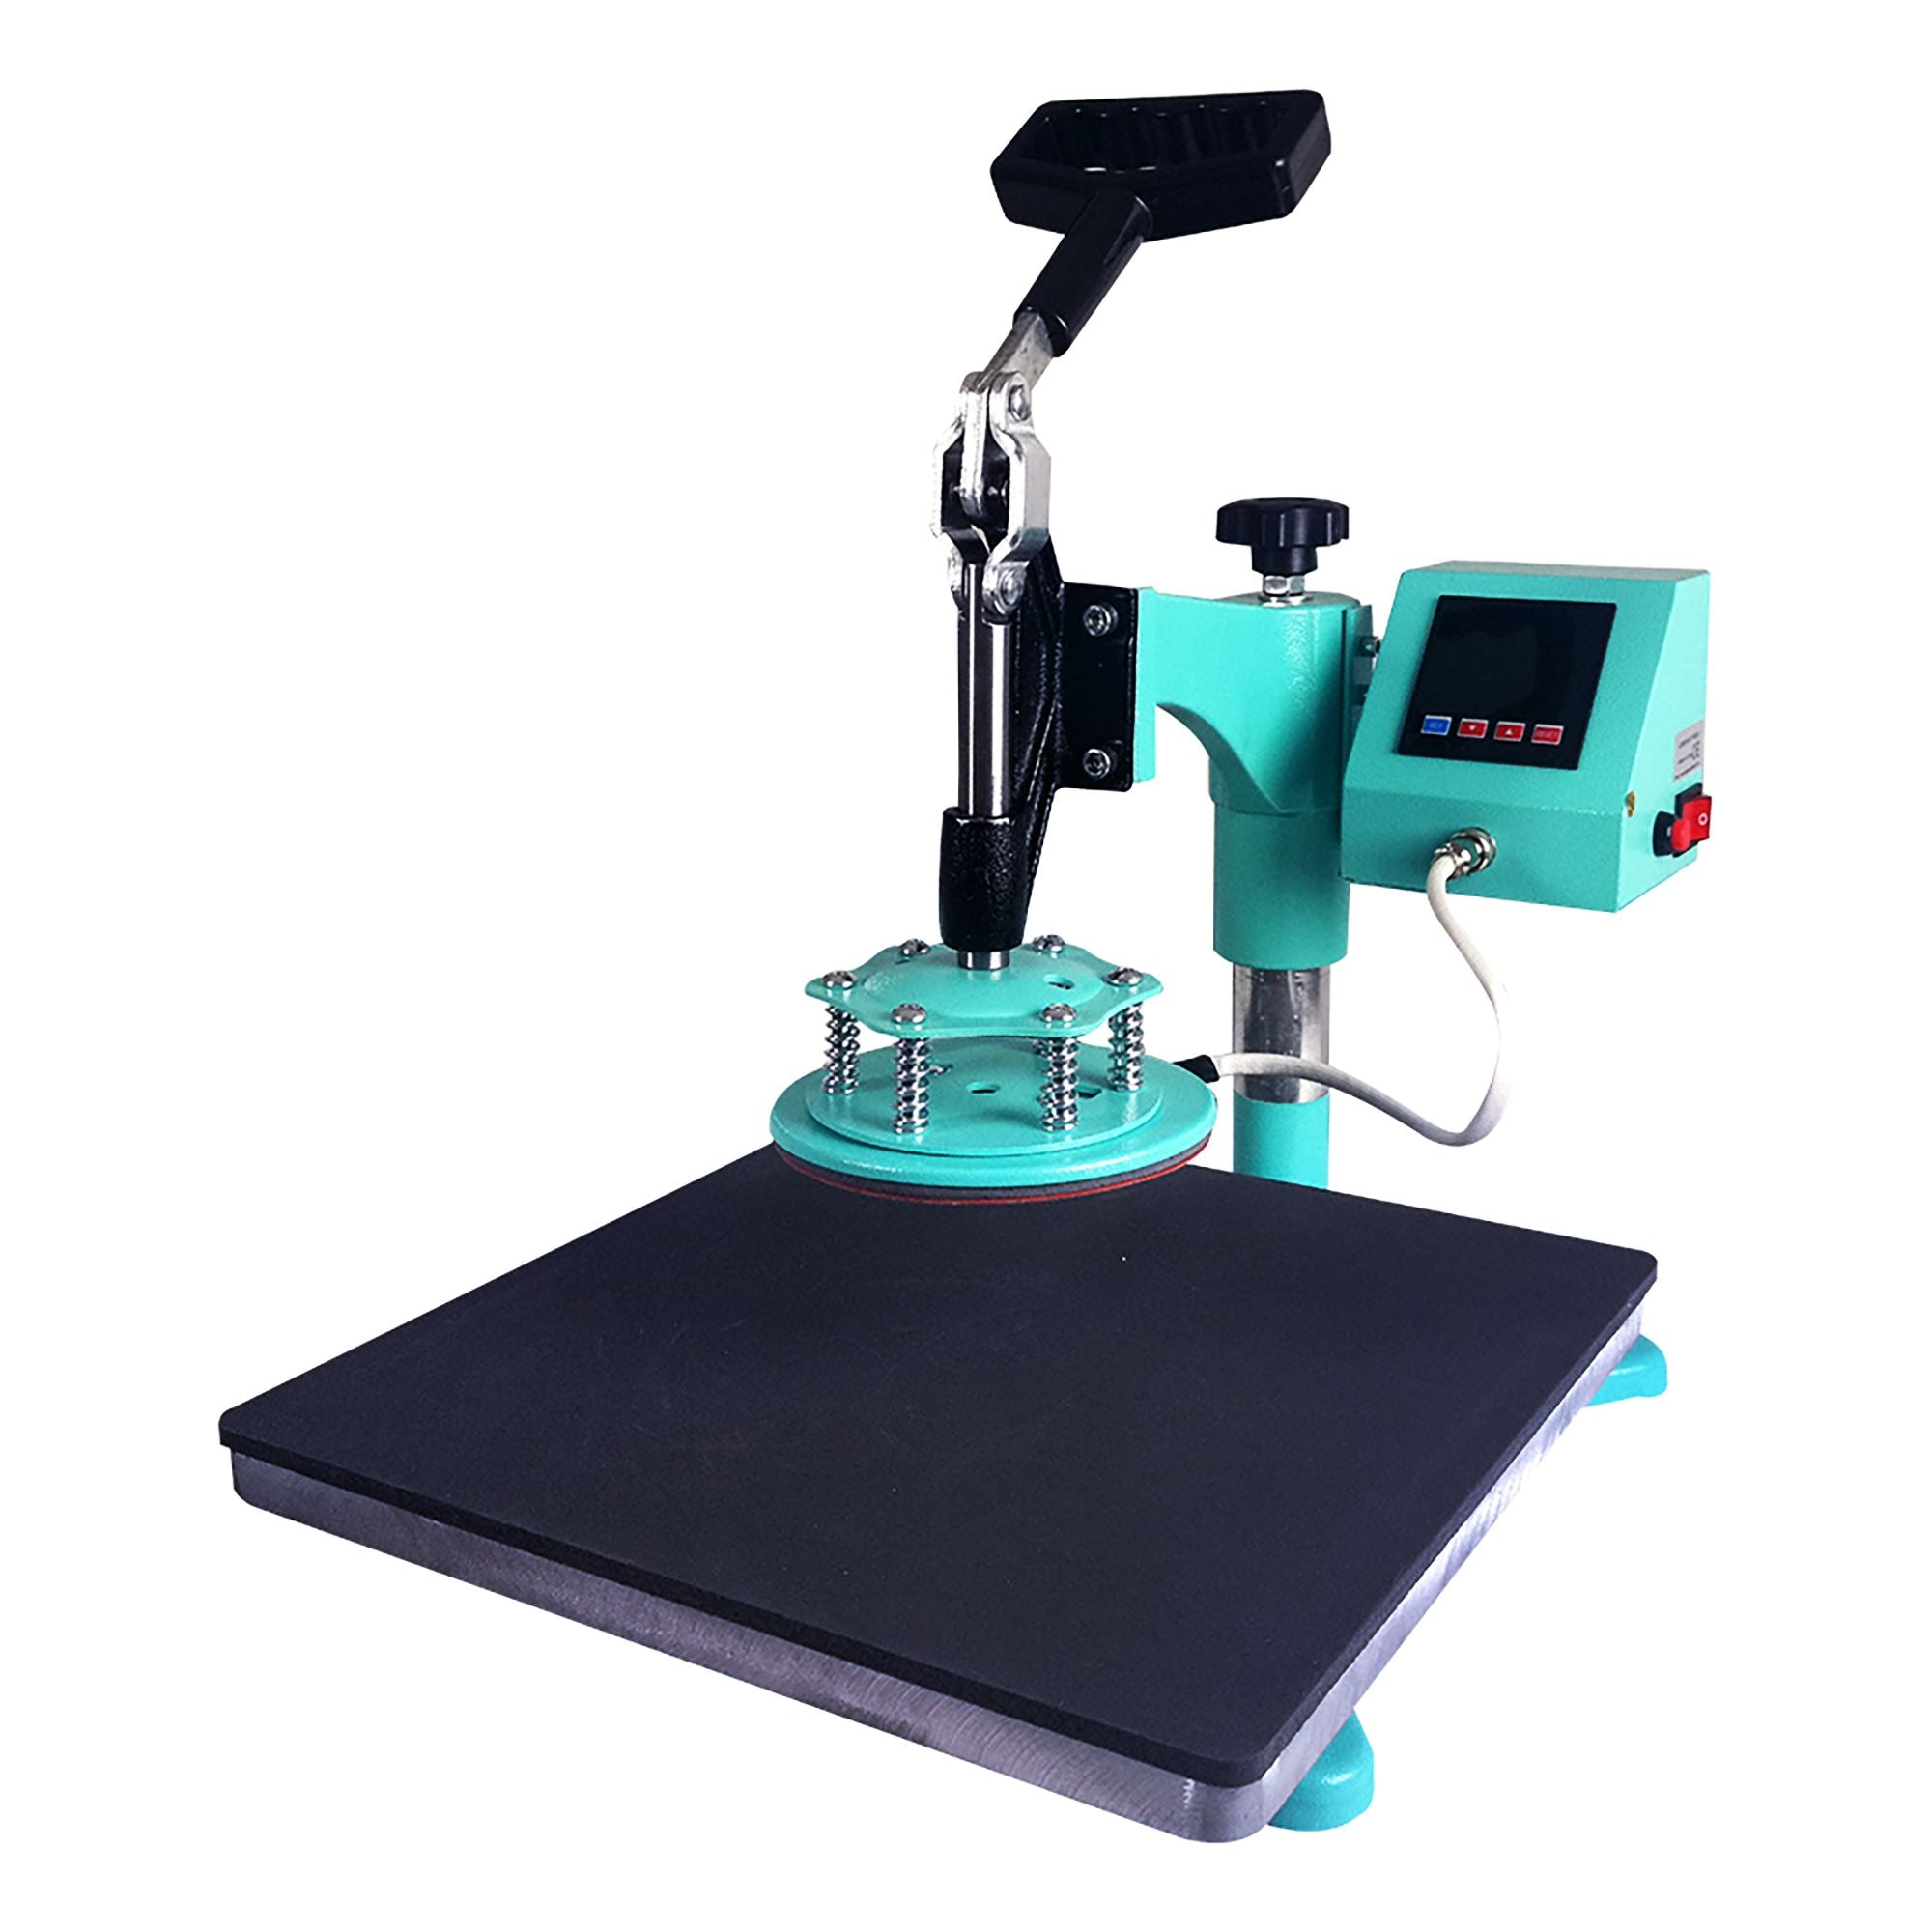 Swing Design 15 inch x 15 inch Craft Heat Press - Turquoise, Men's, Size: One Size